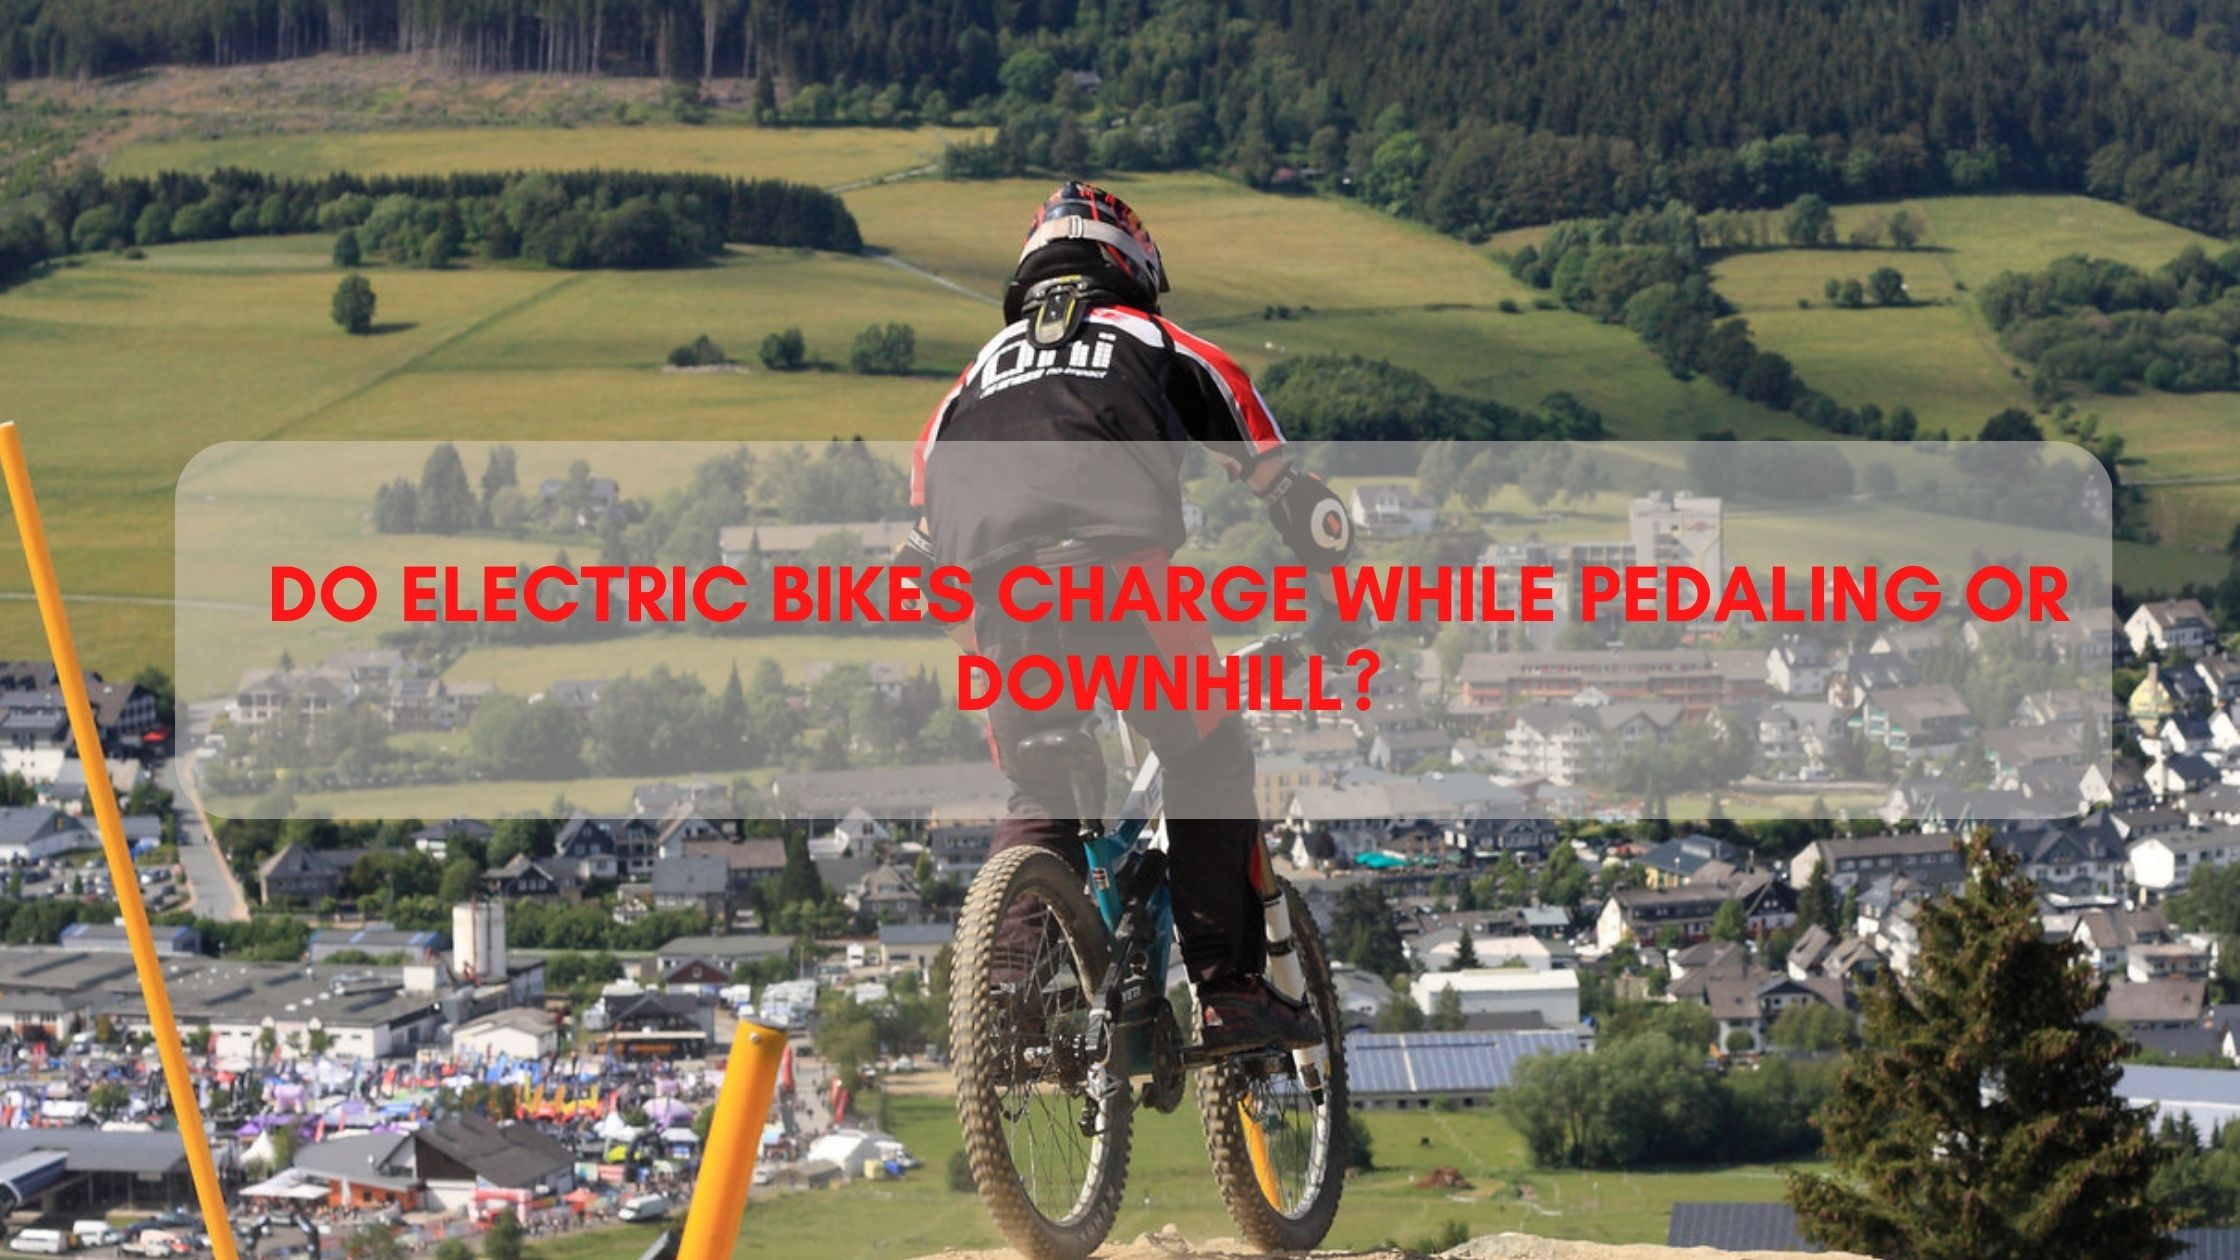 Do Electric Bikes Charge While Pedaling Or Downhill